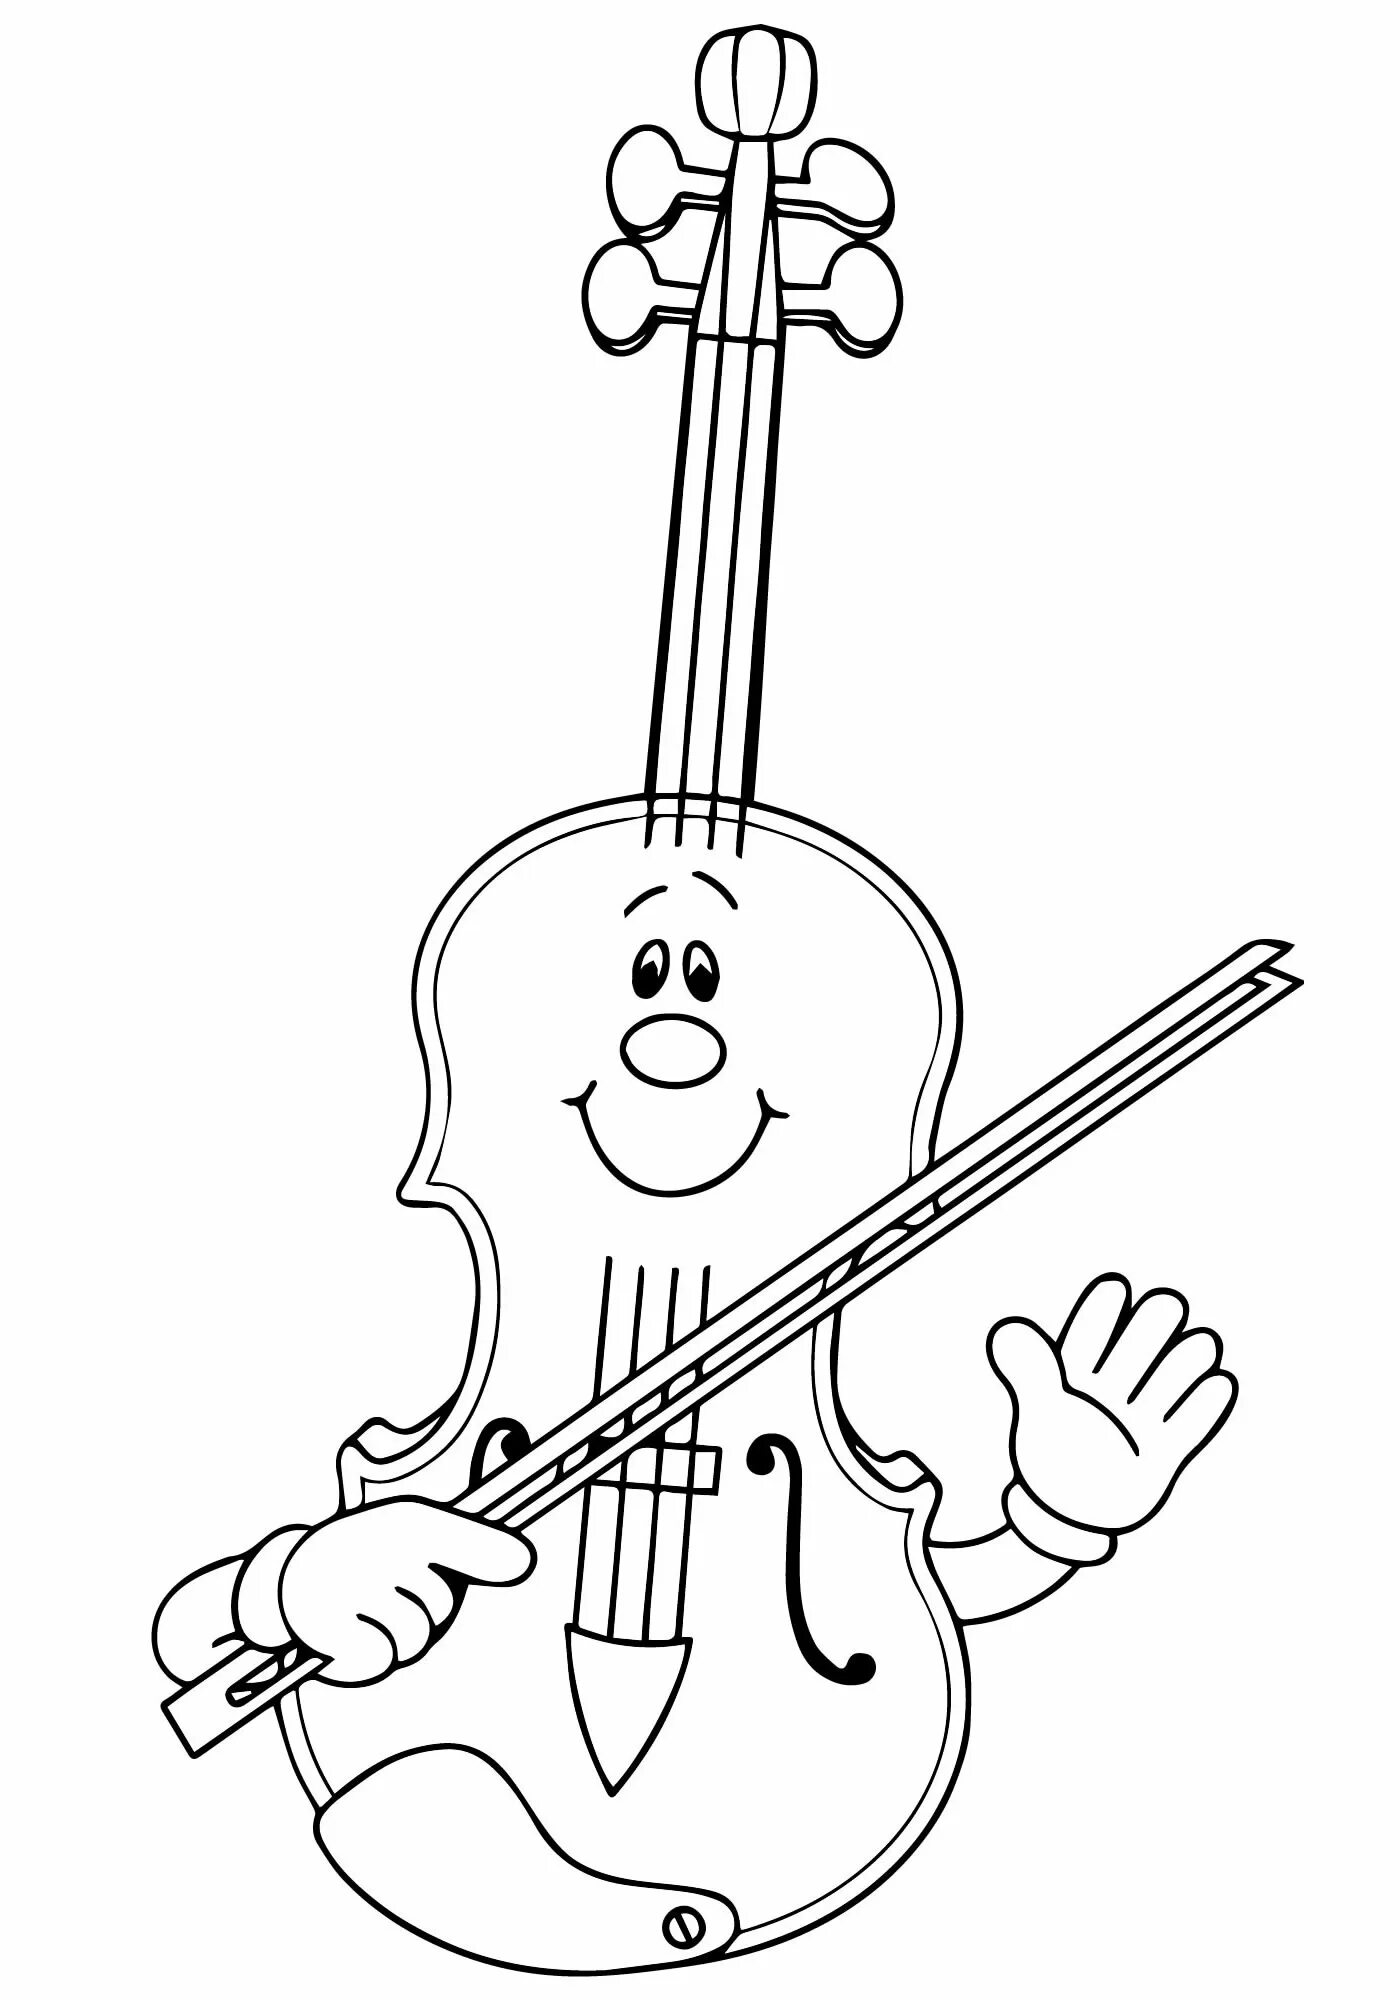 Wonderful violin coloring page for toddlers